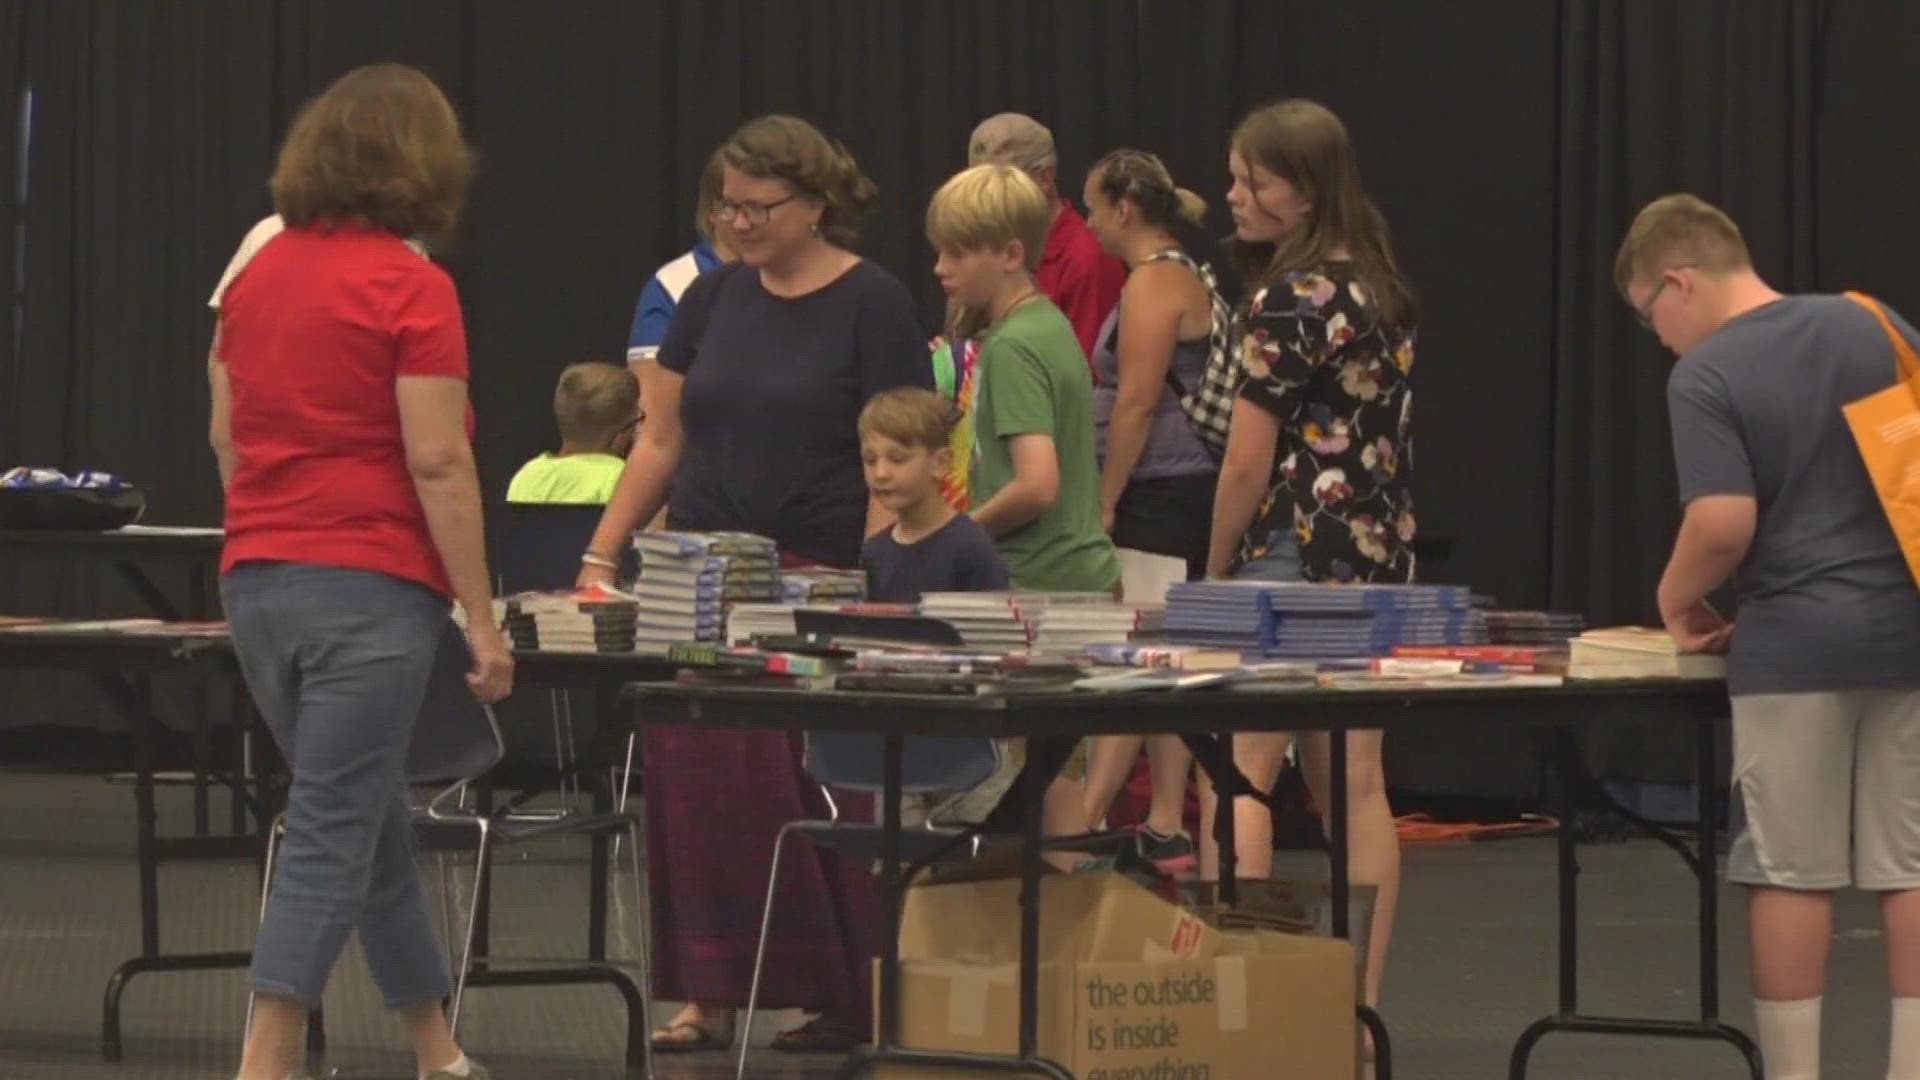 The sixth year of giving school supplies to families in the Augusta area was another success for hundreds of parents as school starts in just a few days.